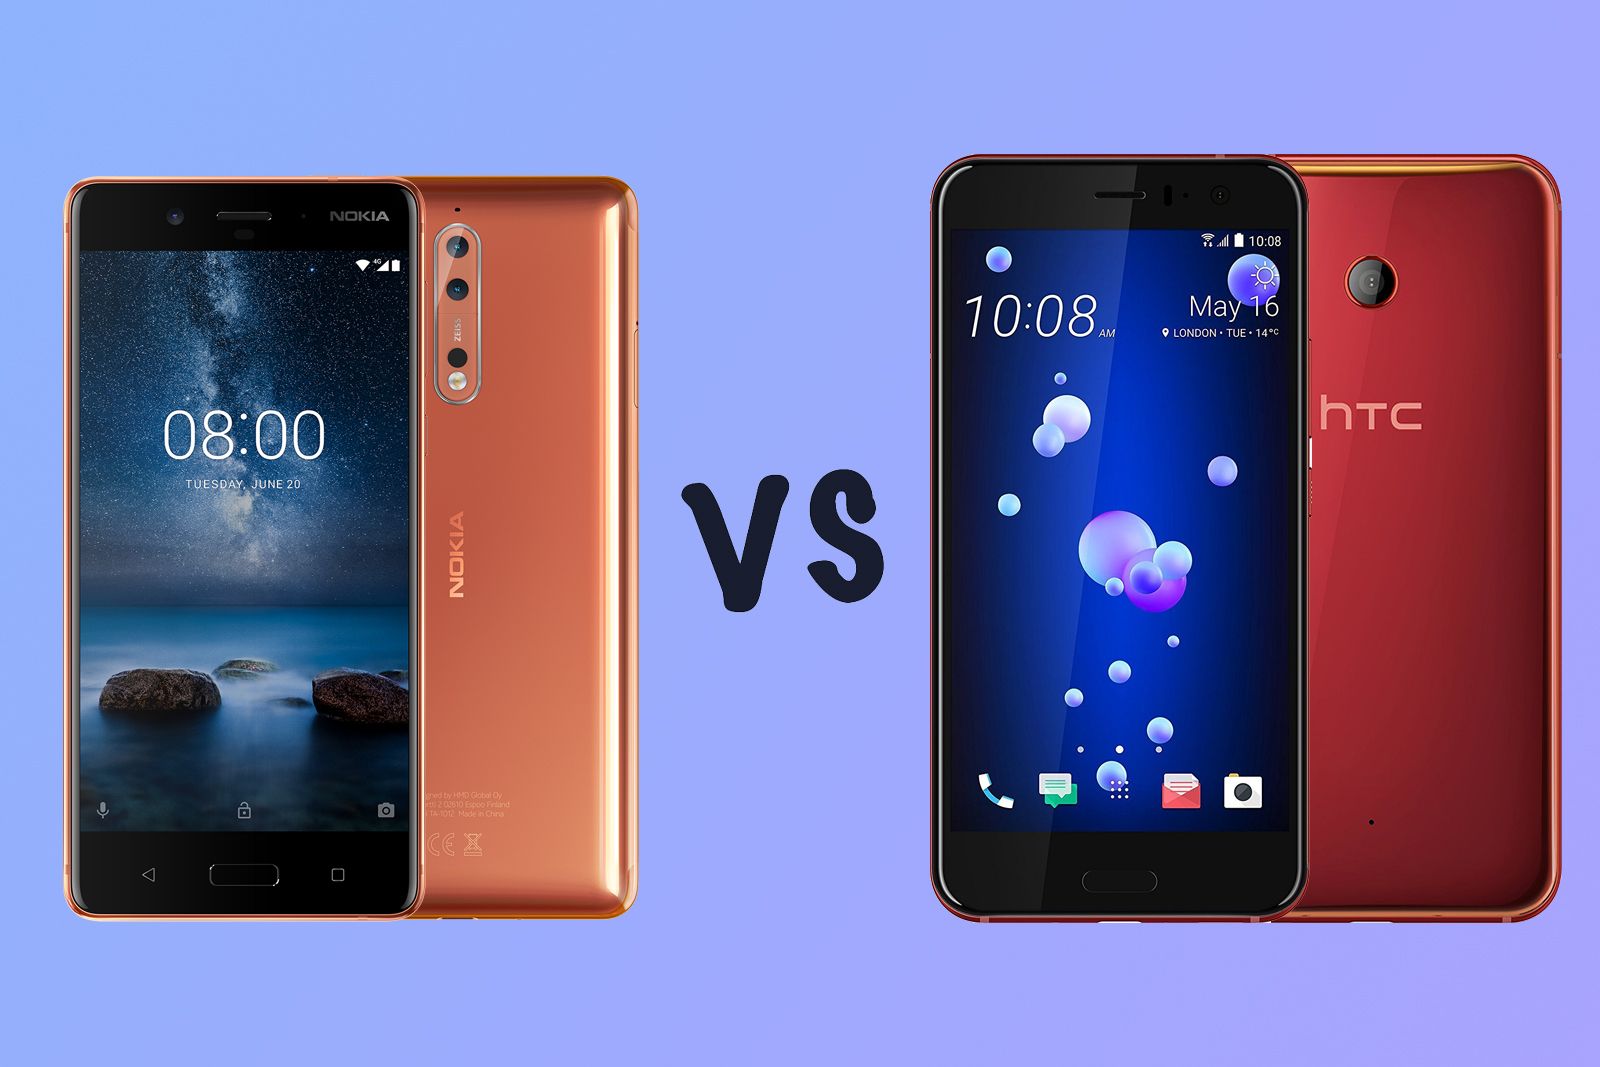 Nokia 8 vs HTC U 11 Whats the difference image 1